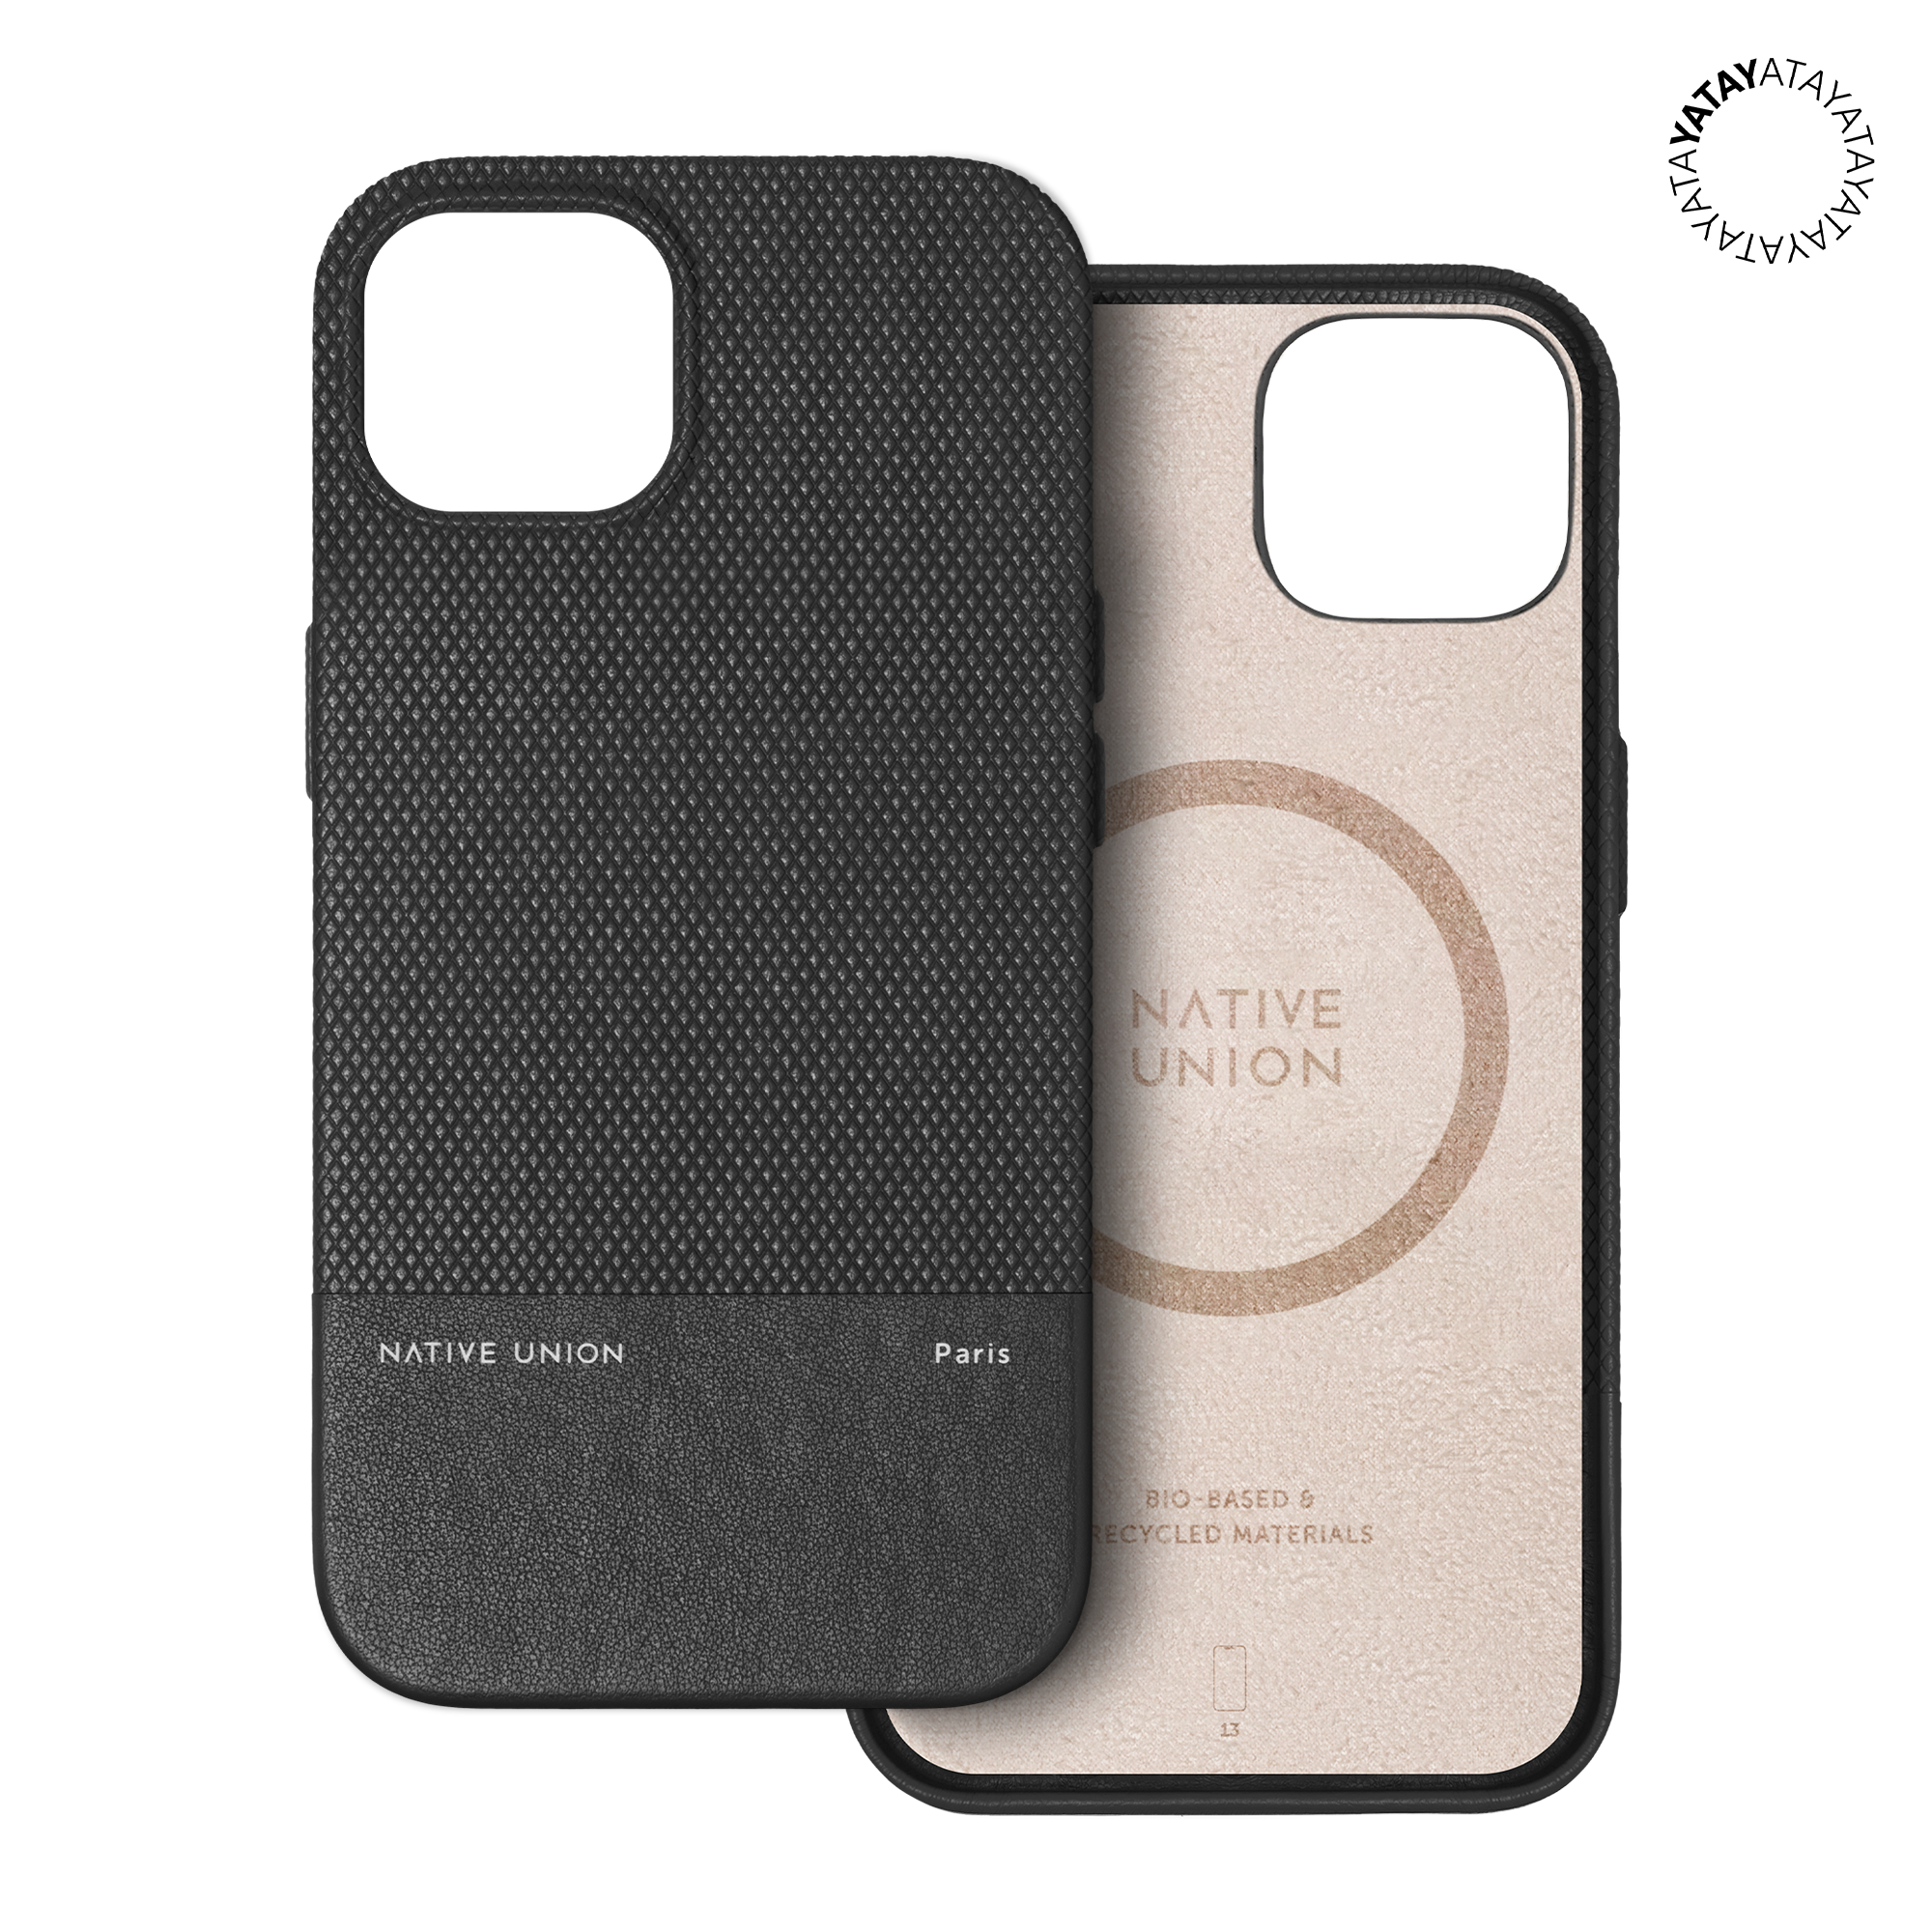 Image of (Re)Classic Case for iPhone 13 NATIVE UNION pAT 4 by AT by 